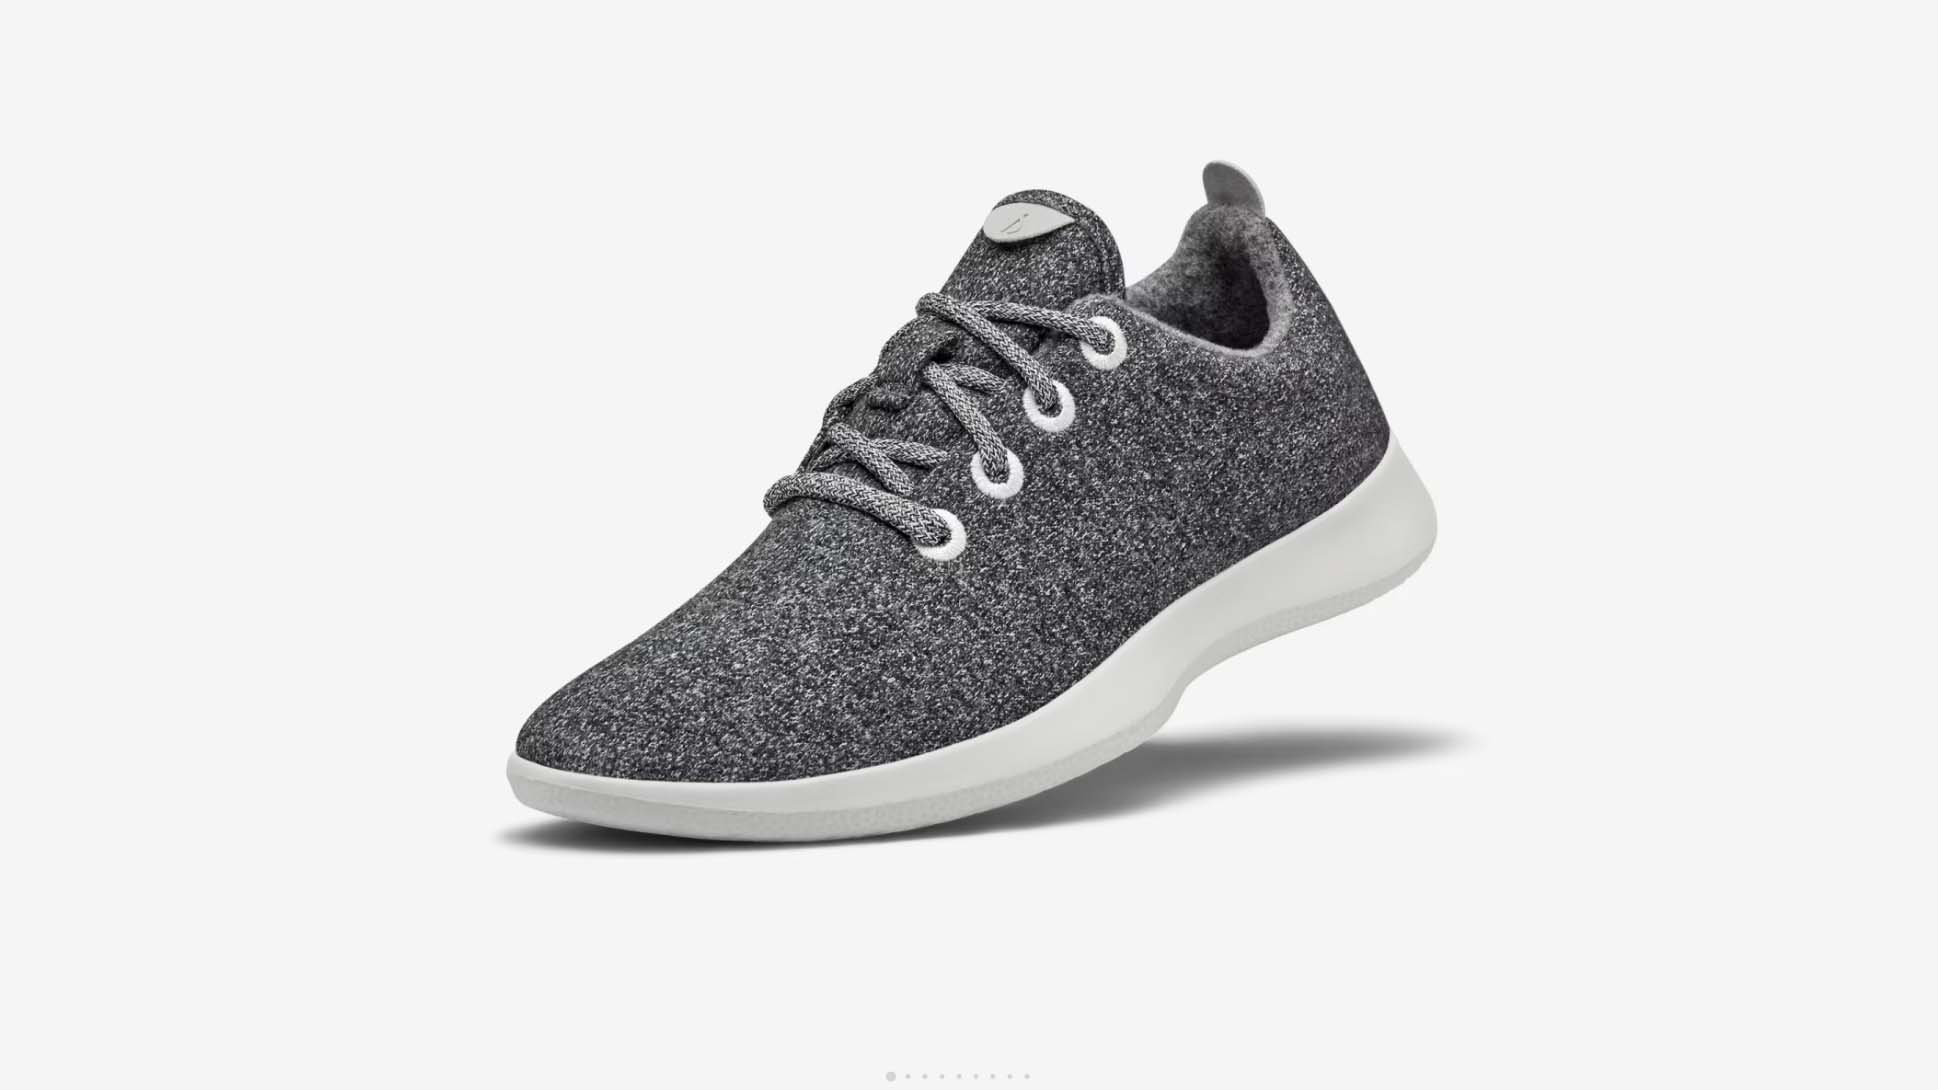 Are Allbirds Supportive Shoes?